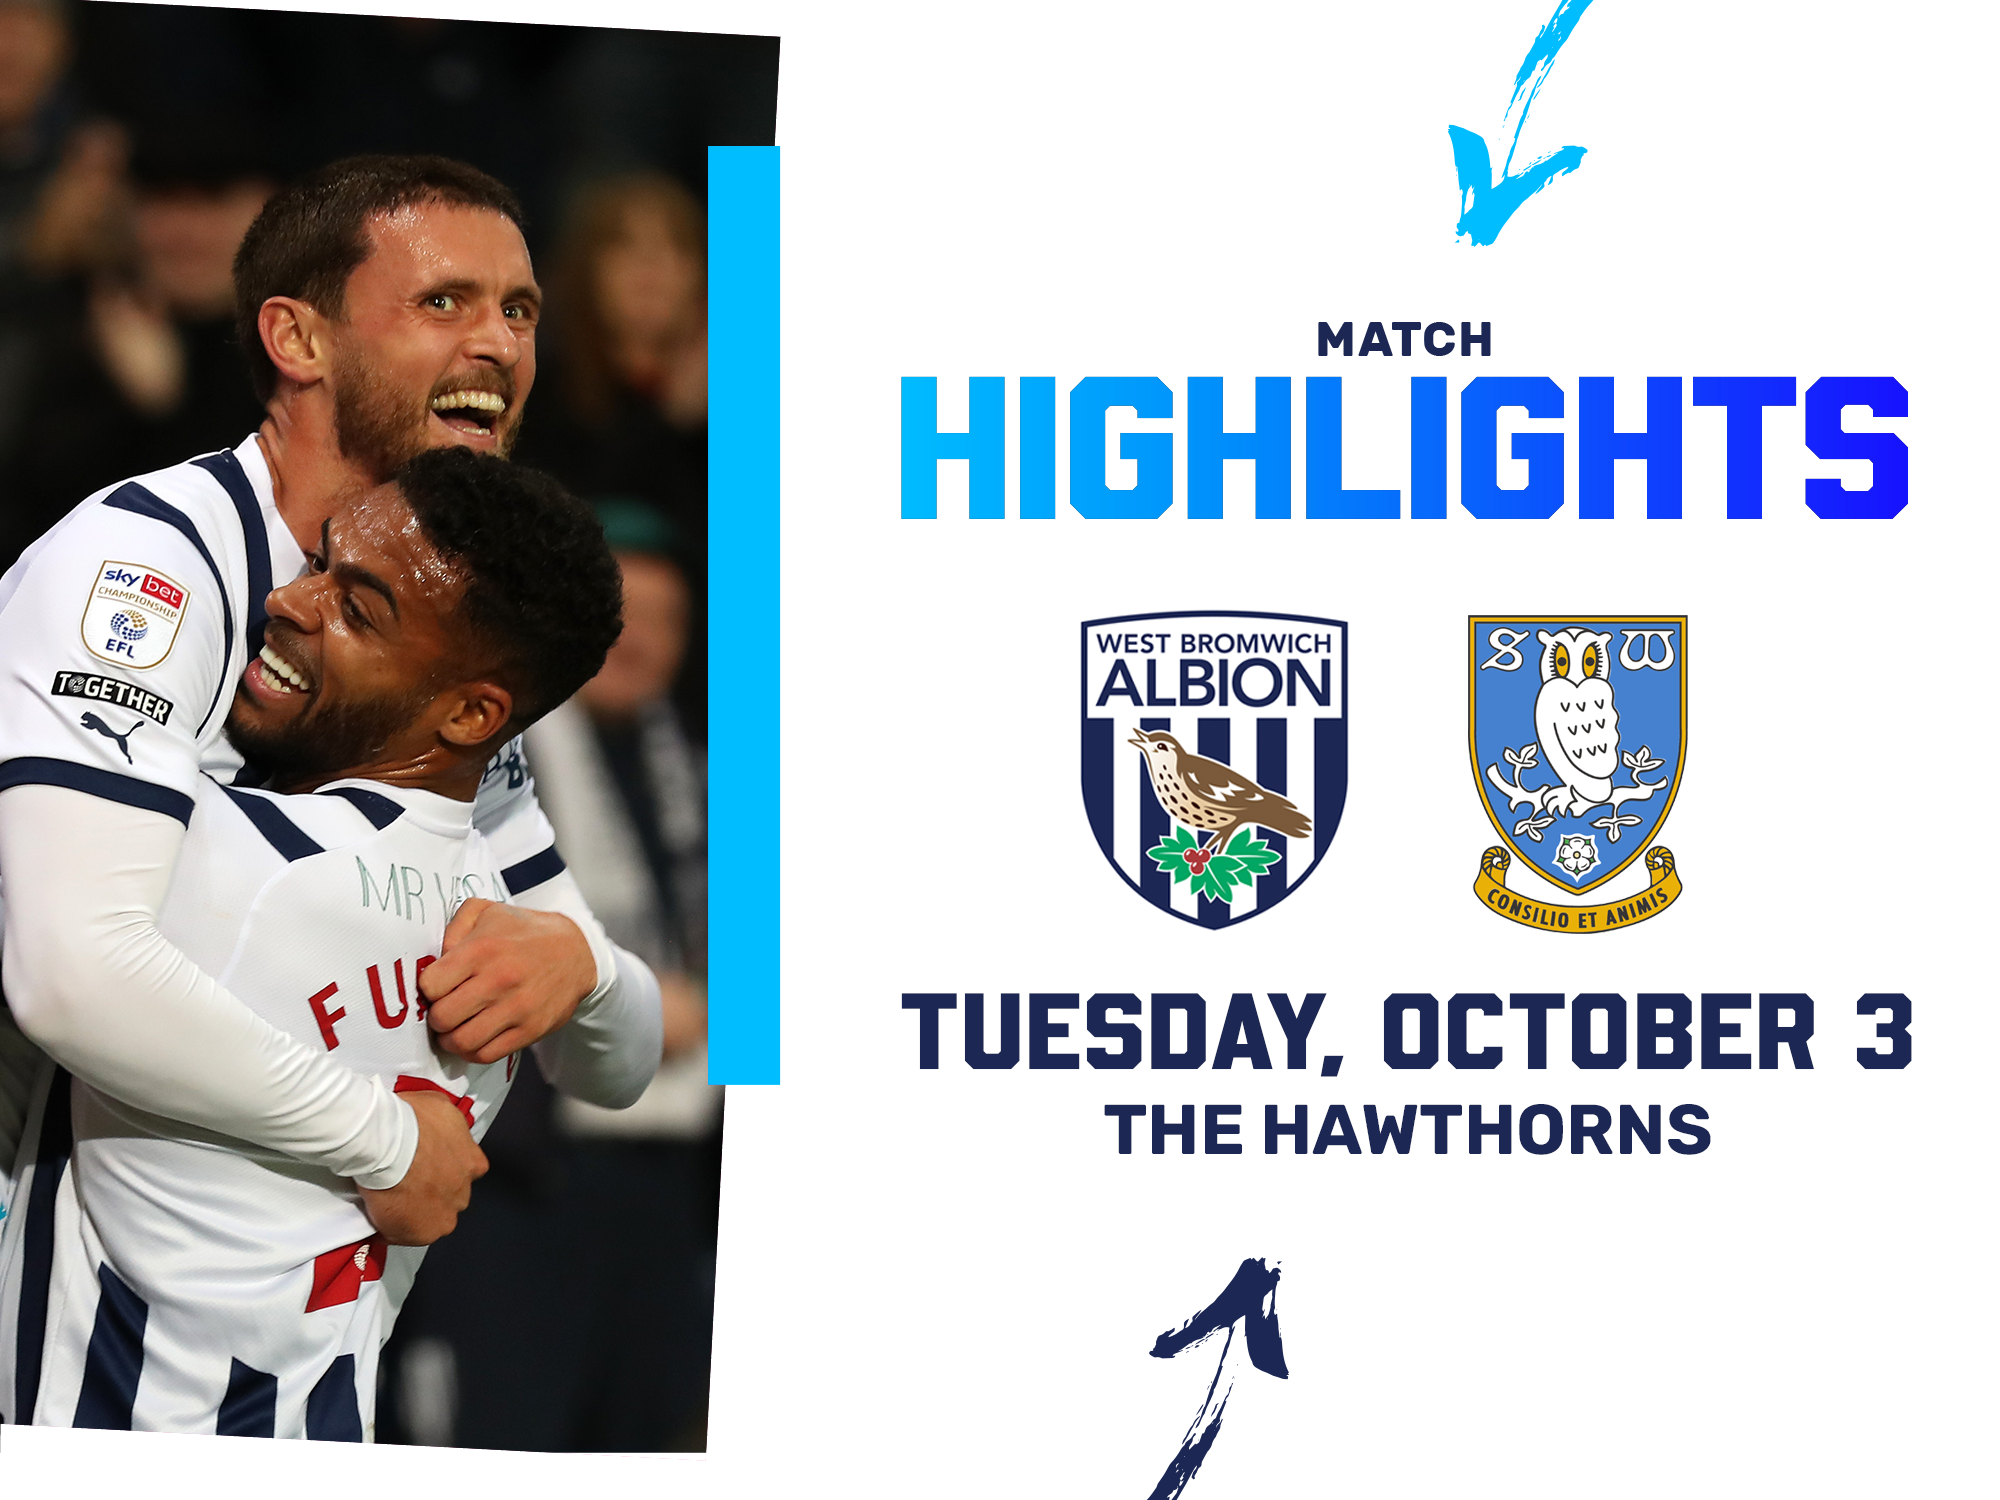 A photo graphic, containing the crests of Albion and Sheffield Wednesday, showing John Swift and Darnell Furlong celebrating, leading to a story containing highlights of Tuesday's game between the Baggies and the Owls